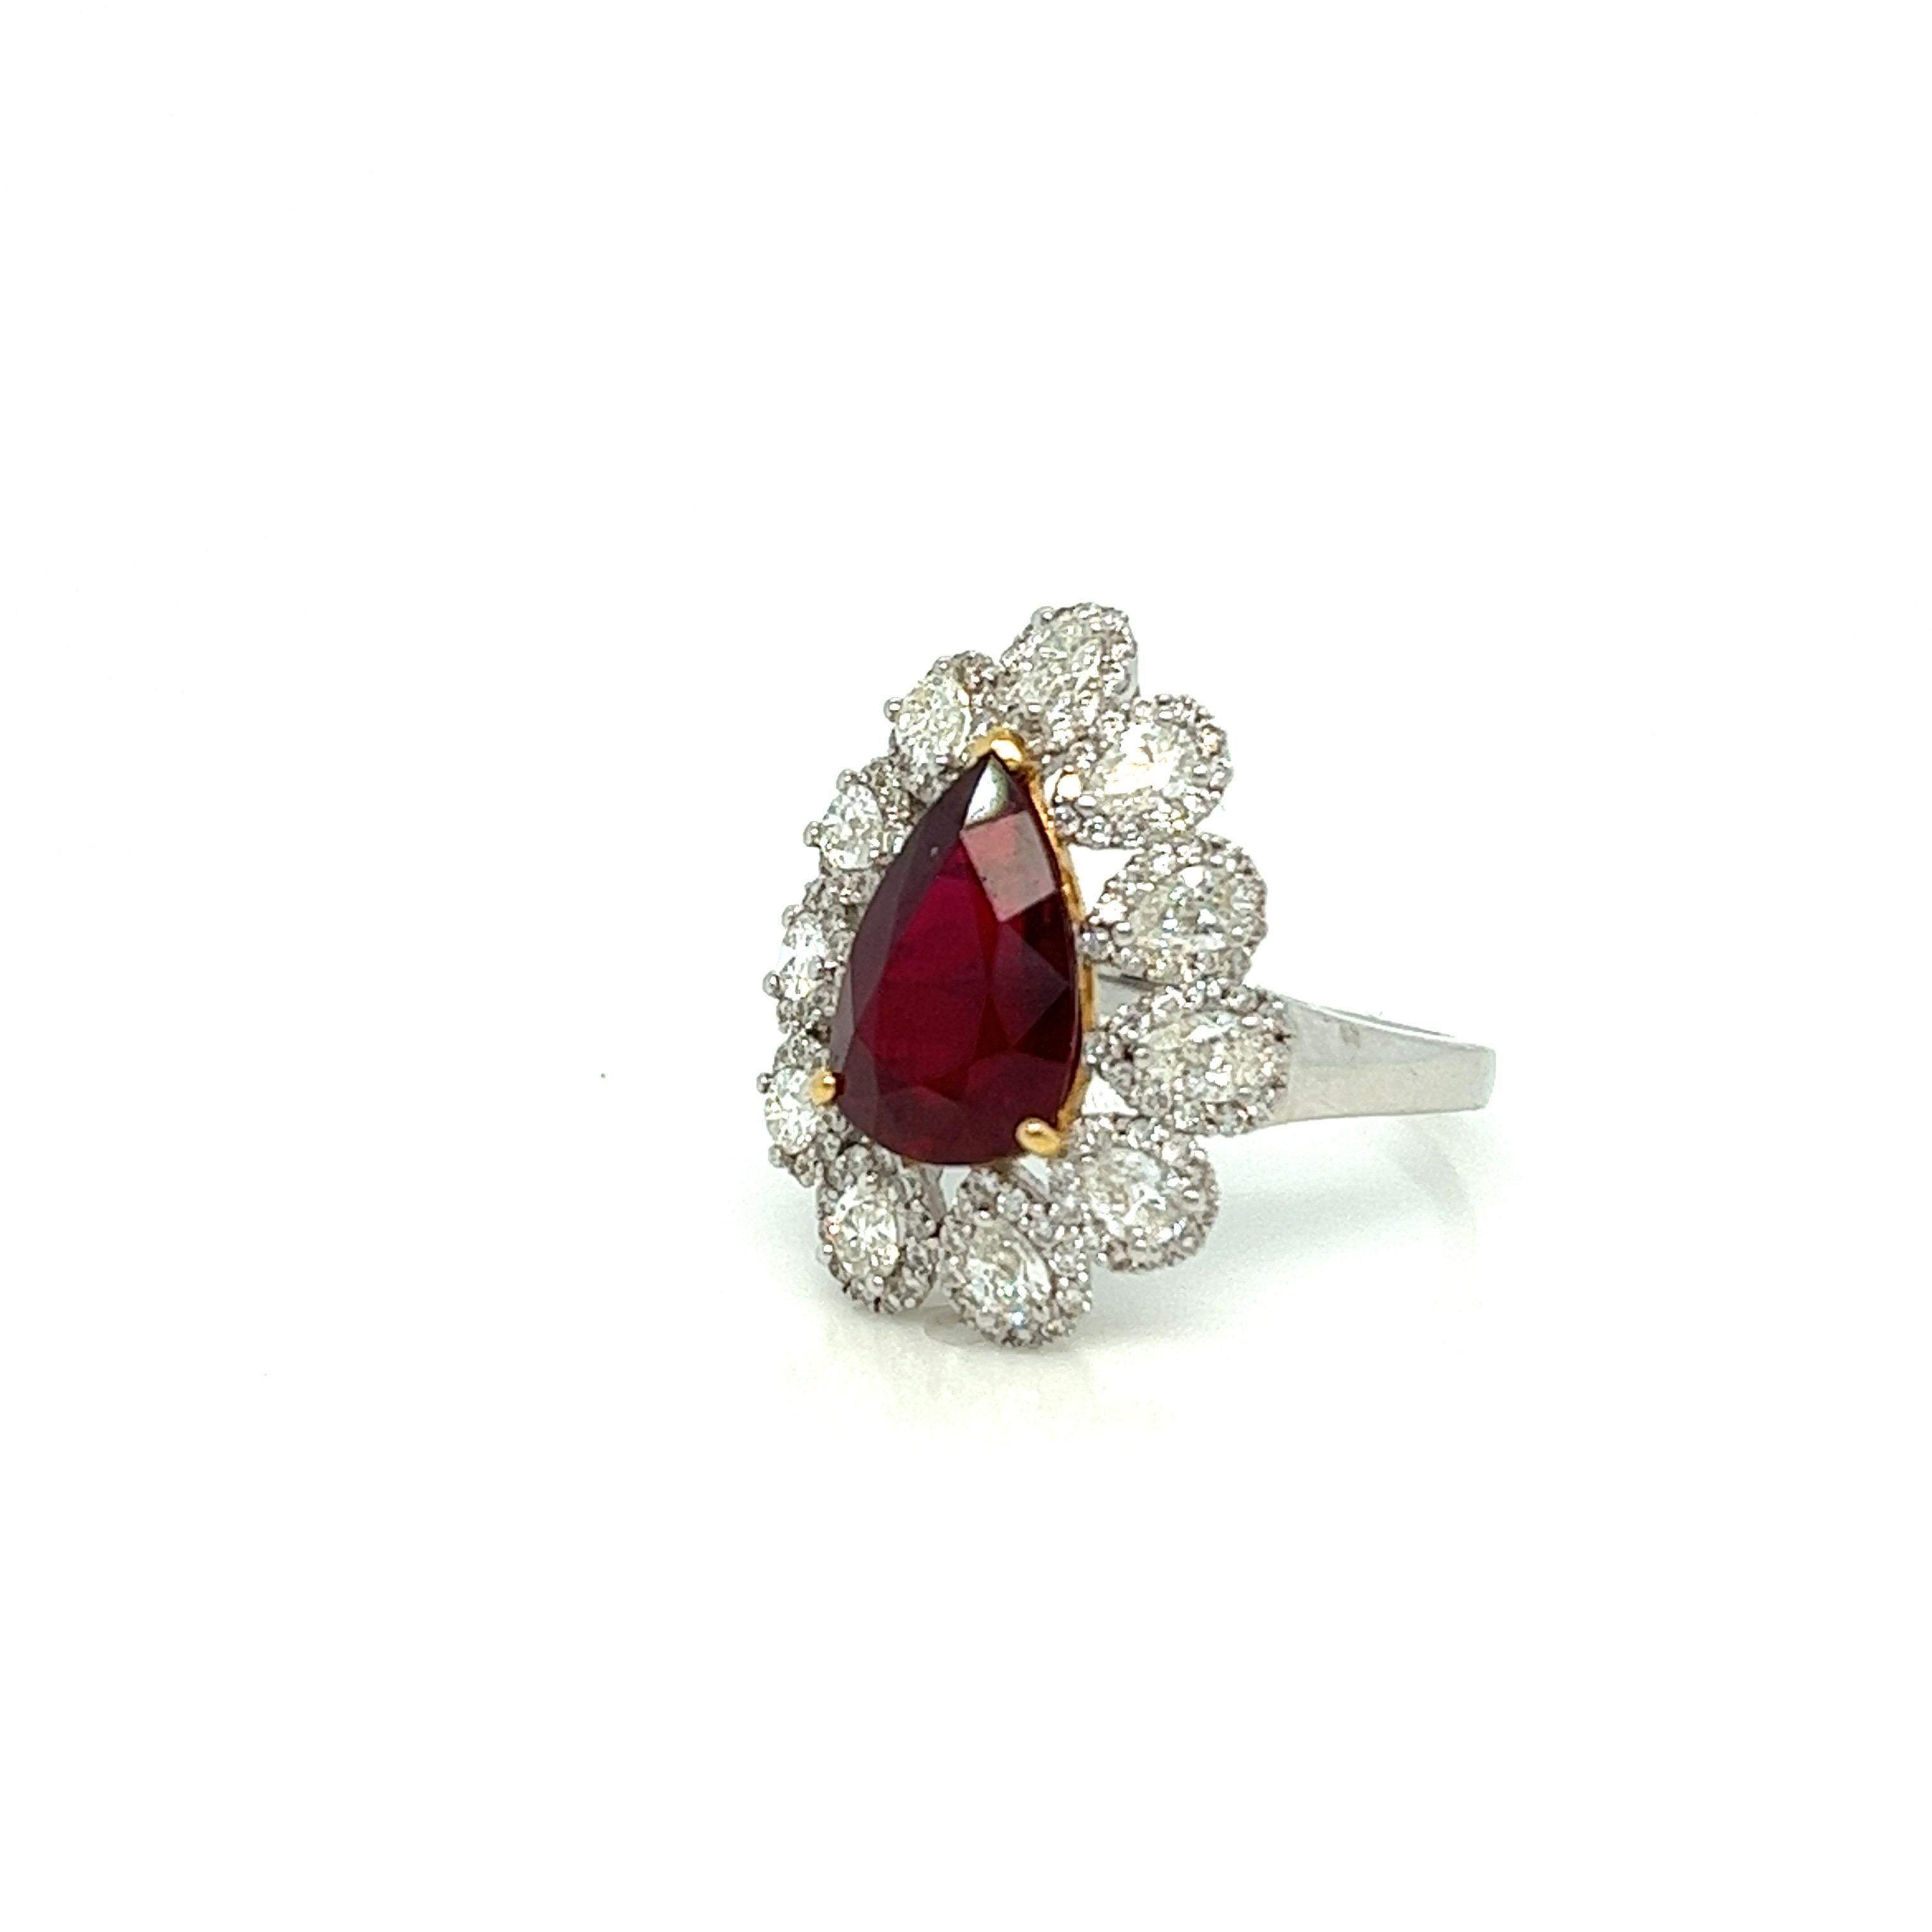 A spectacular cocktail ring, centering on the most delicious pear shape ruby center! It covers the perfect amount of finger real estate we love to see! She’s surrounded by bold and bright pear shape diamonds with an added halo around each stone. The